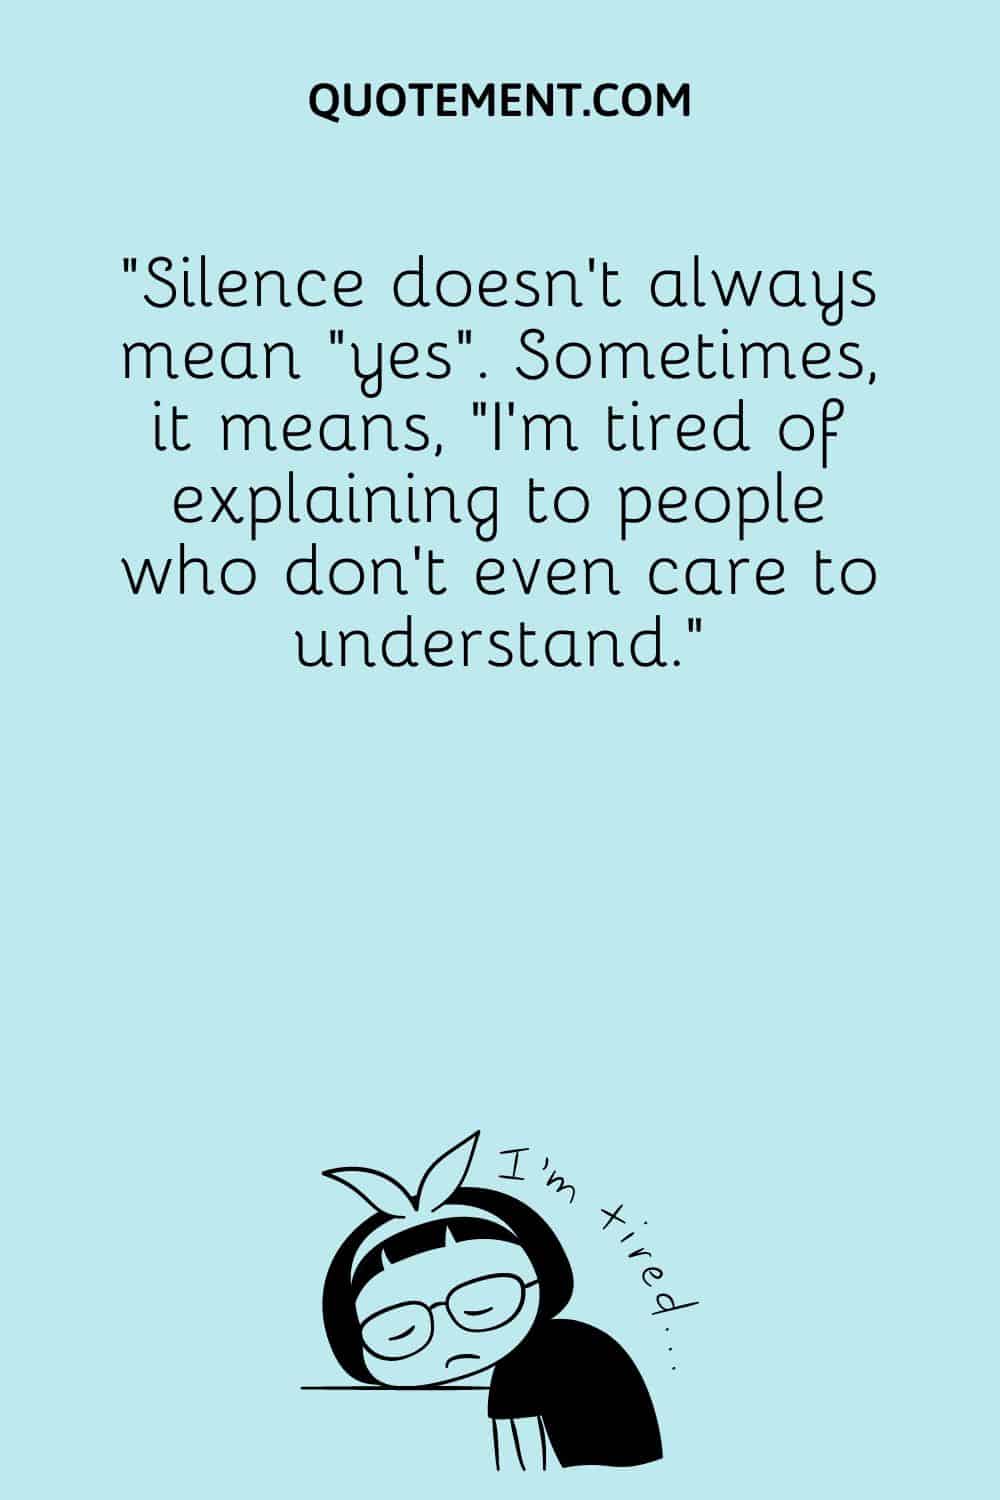 Silence doesn’t always mean “yes”